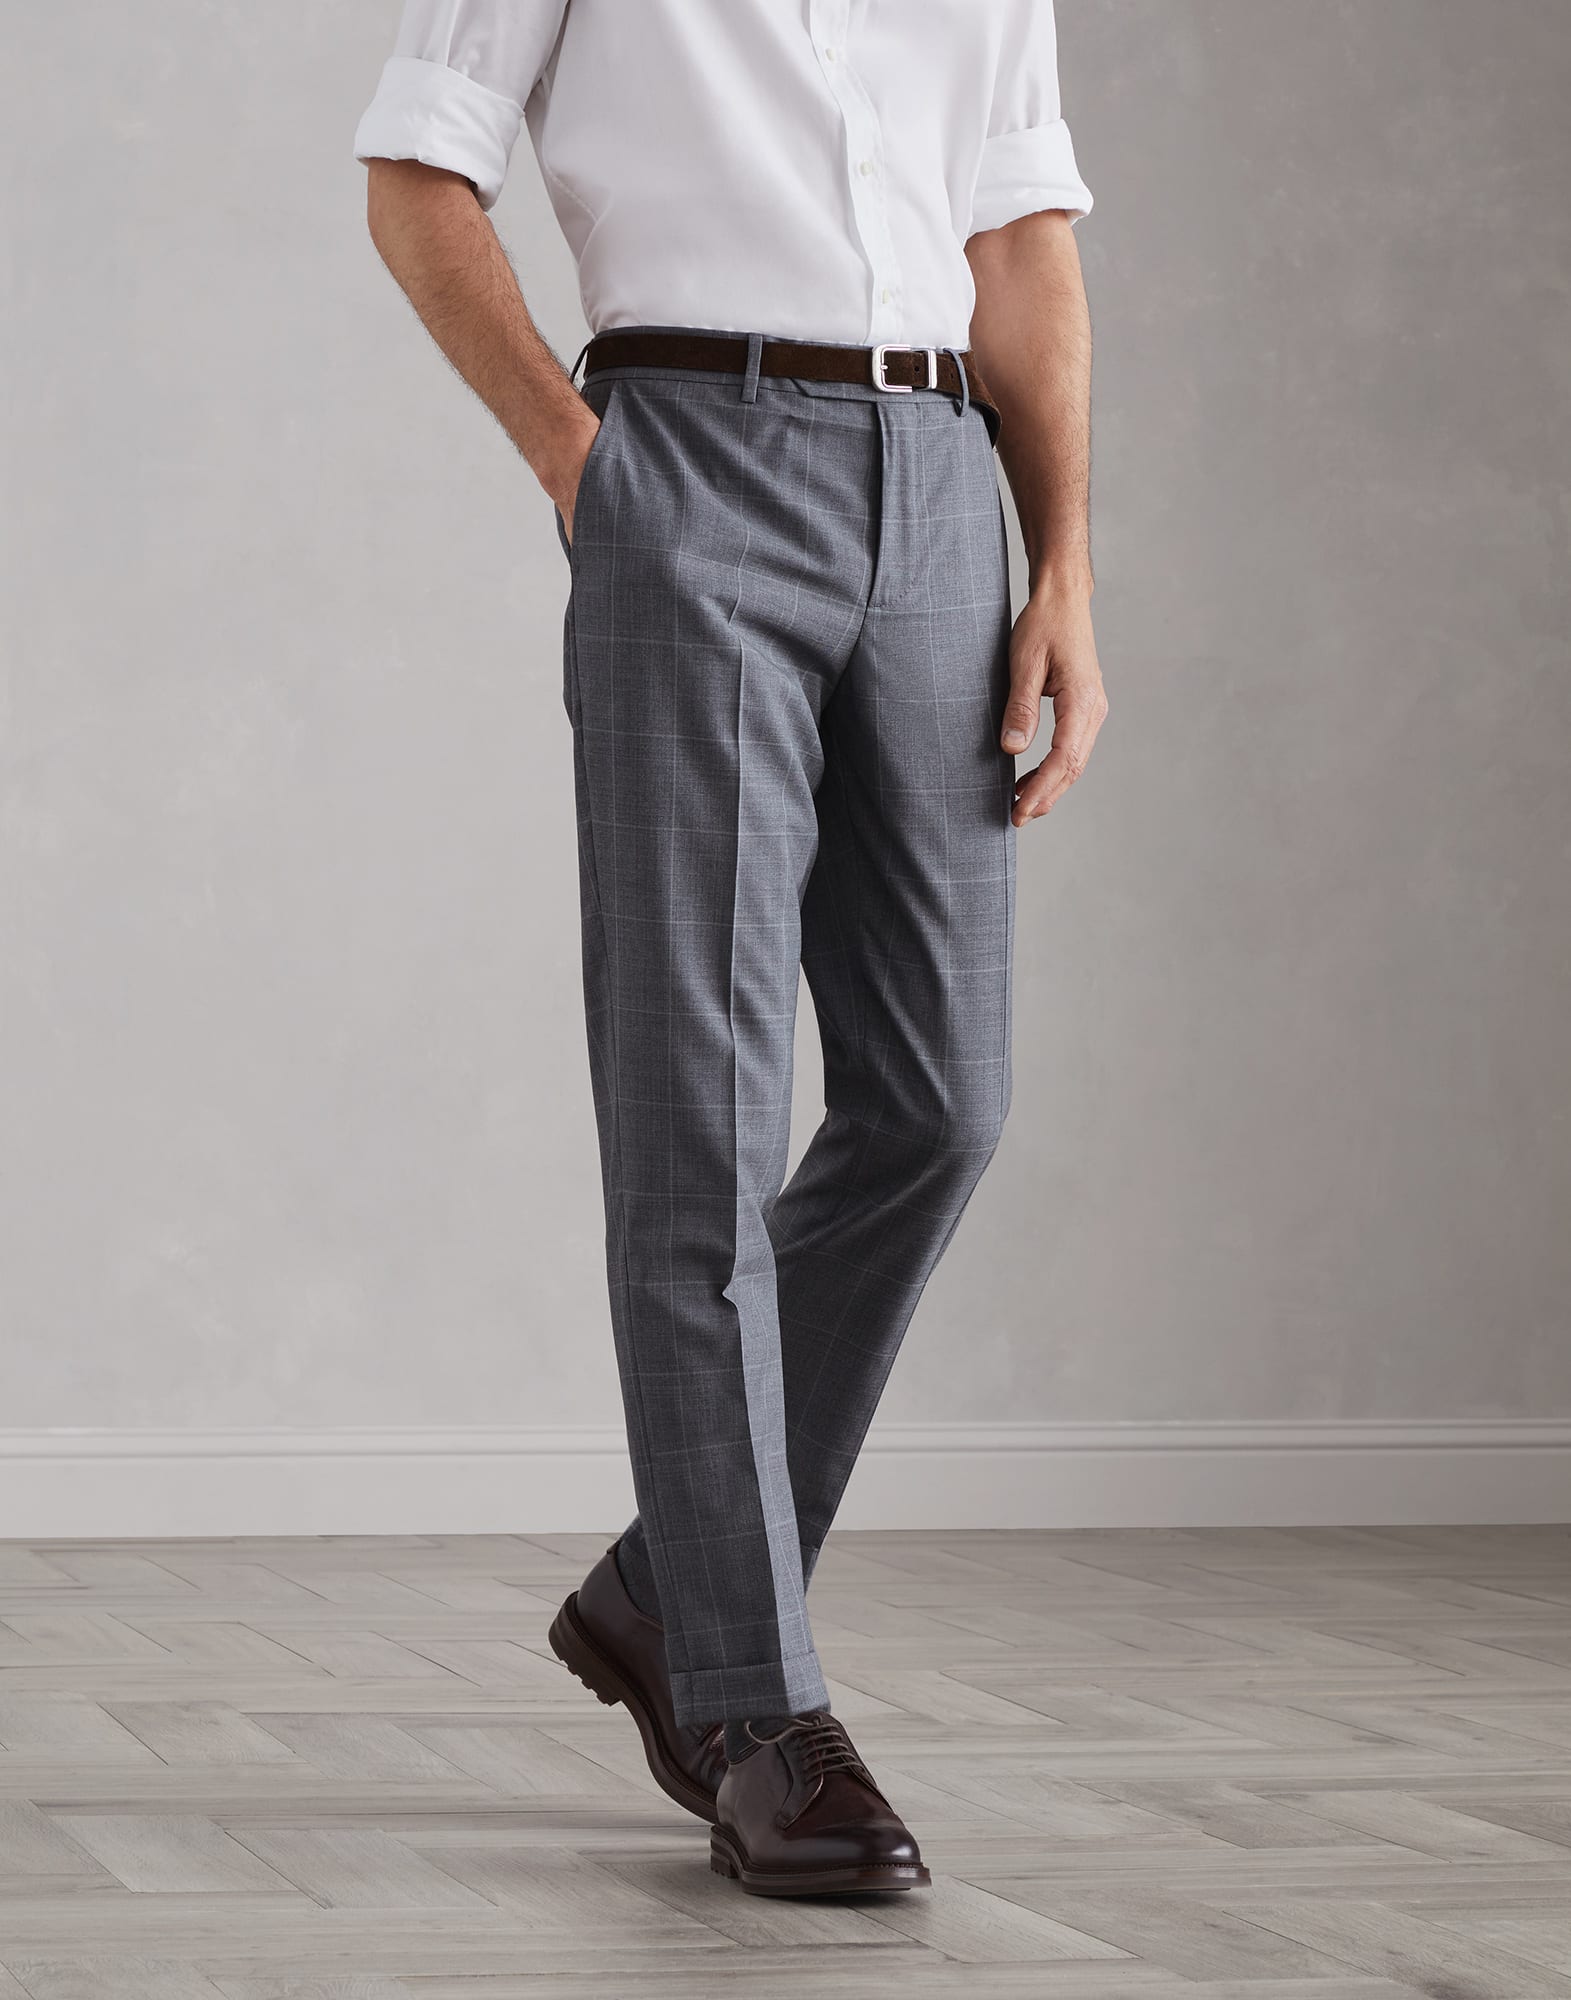 Formal fit trousers